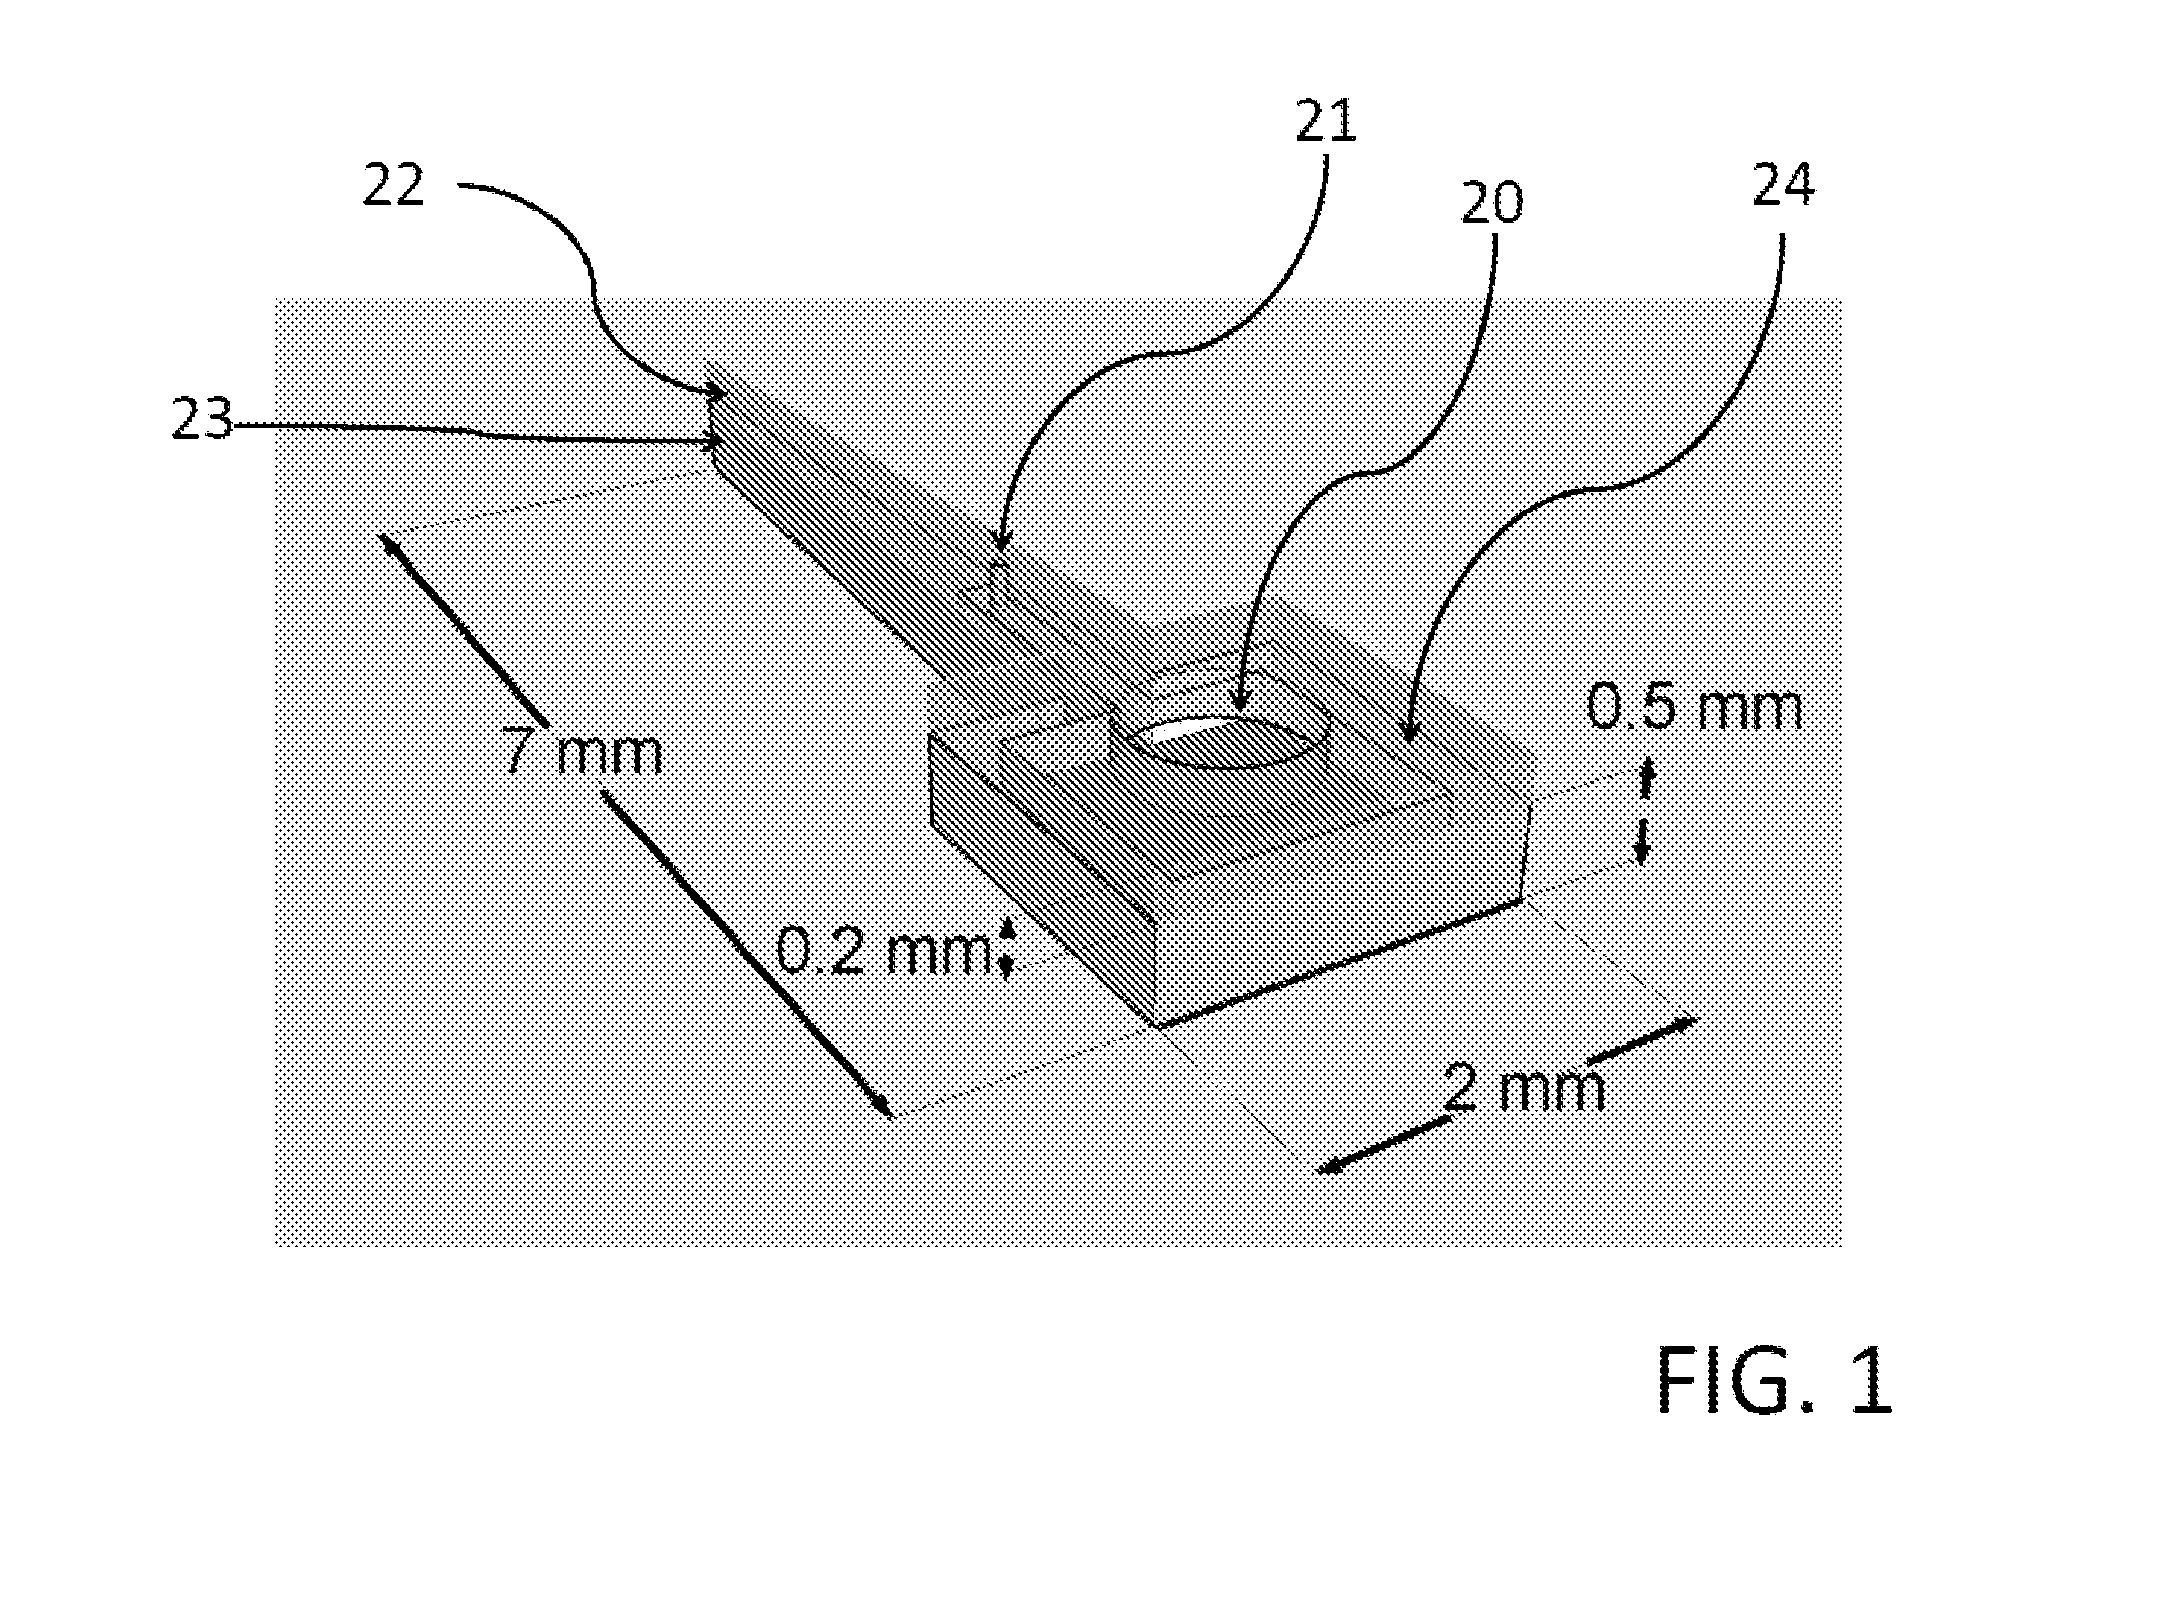 Multielectrode array and method of fabrication